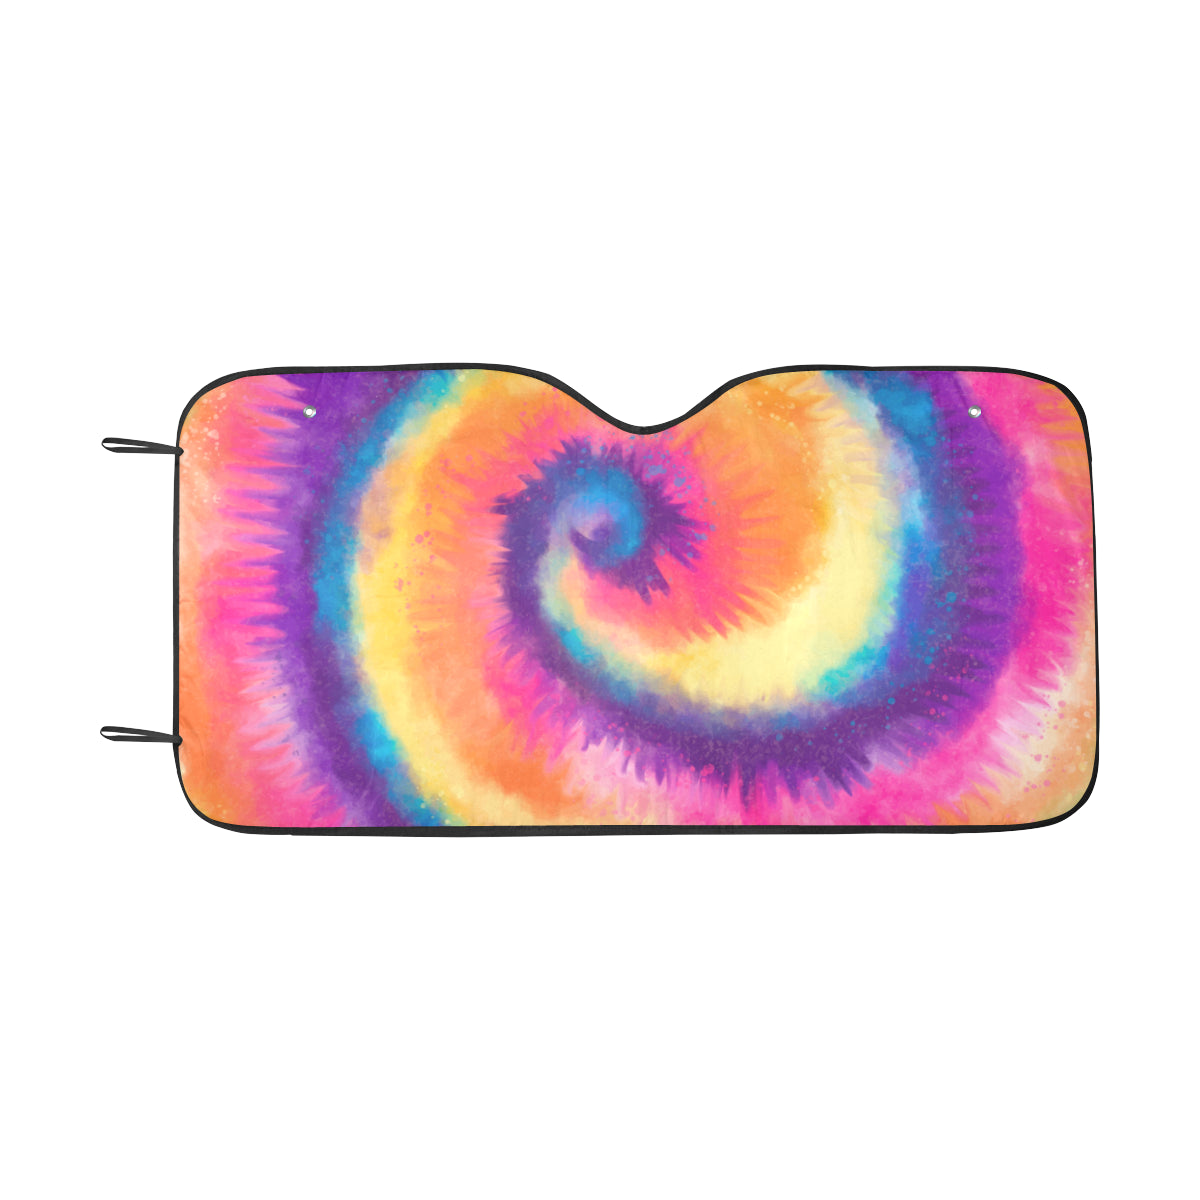 Tie Dye Windshield Sun Shade, Colorful Hippie Psychedelically Car Accessories Auto Protector Window Visor Screen Cover Decor 55" x 29.53"